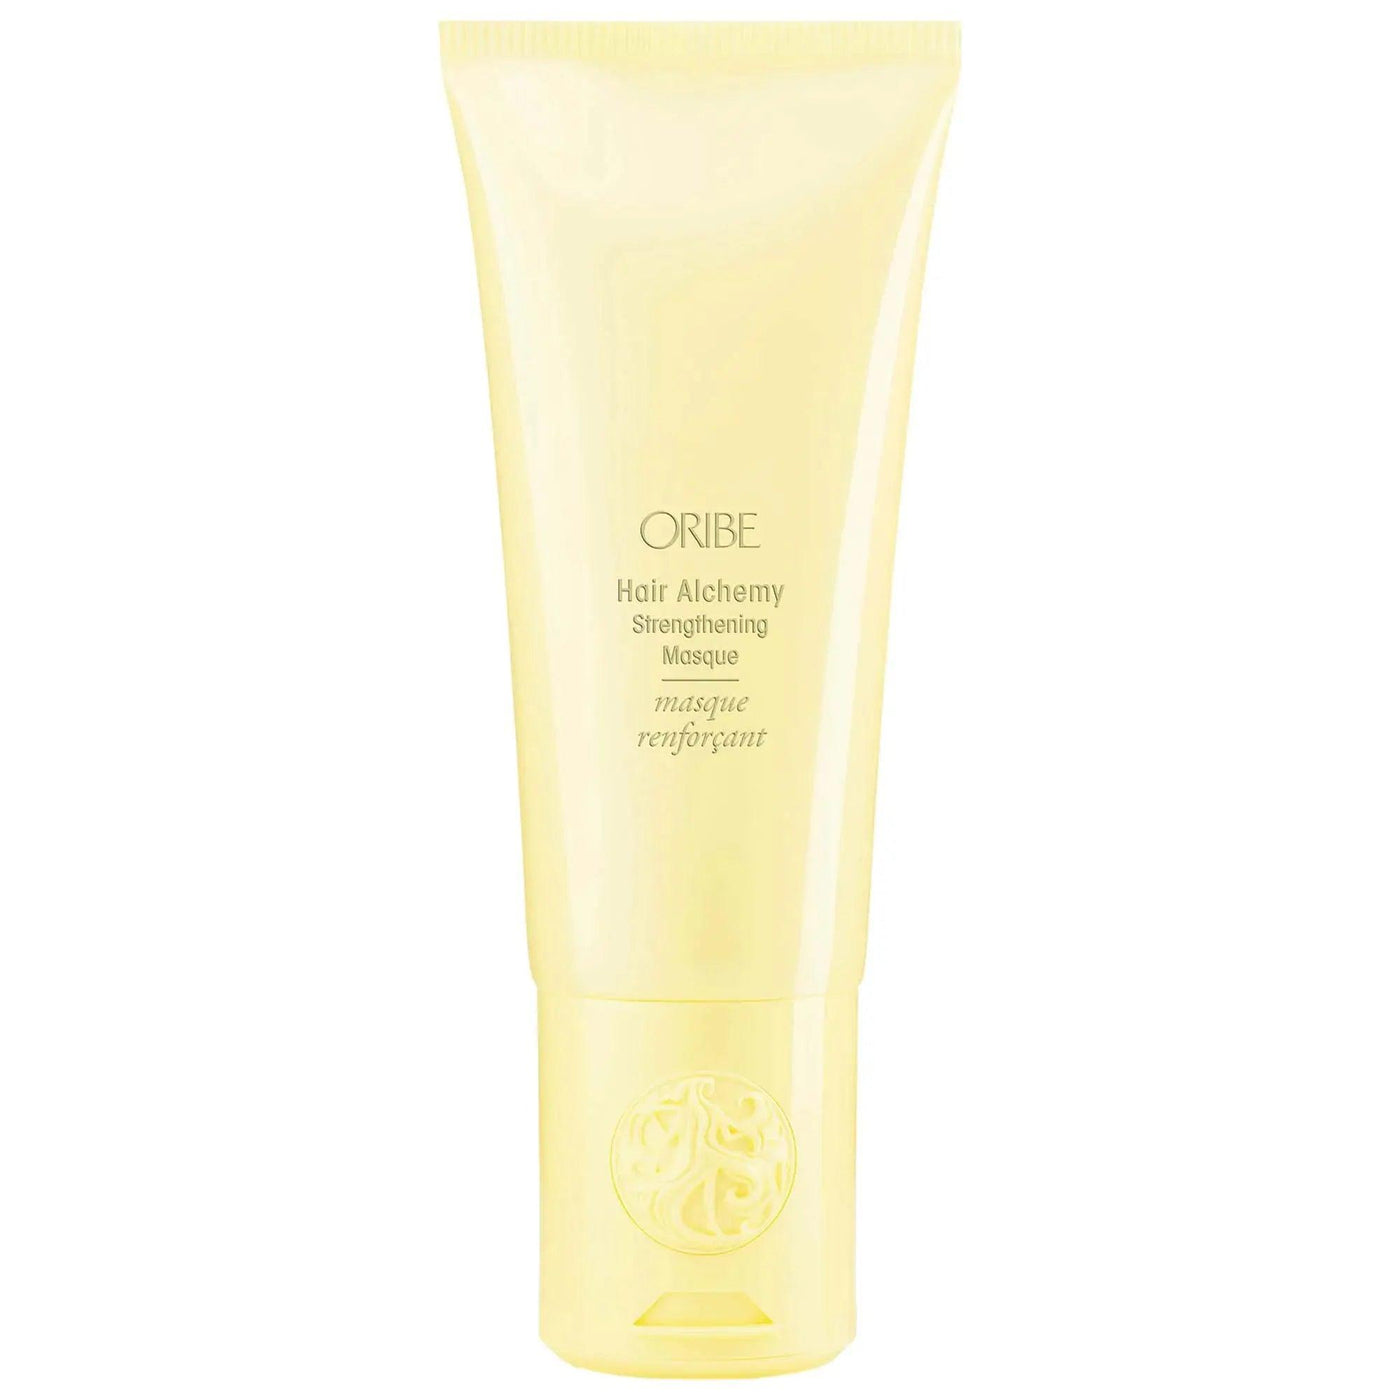 Hair Alchemy Strengthening Masque Oribe Boutique Deauville